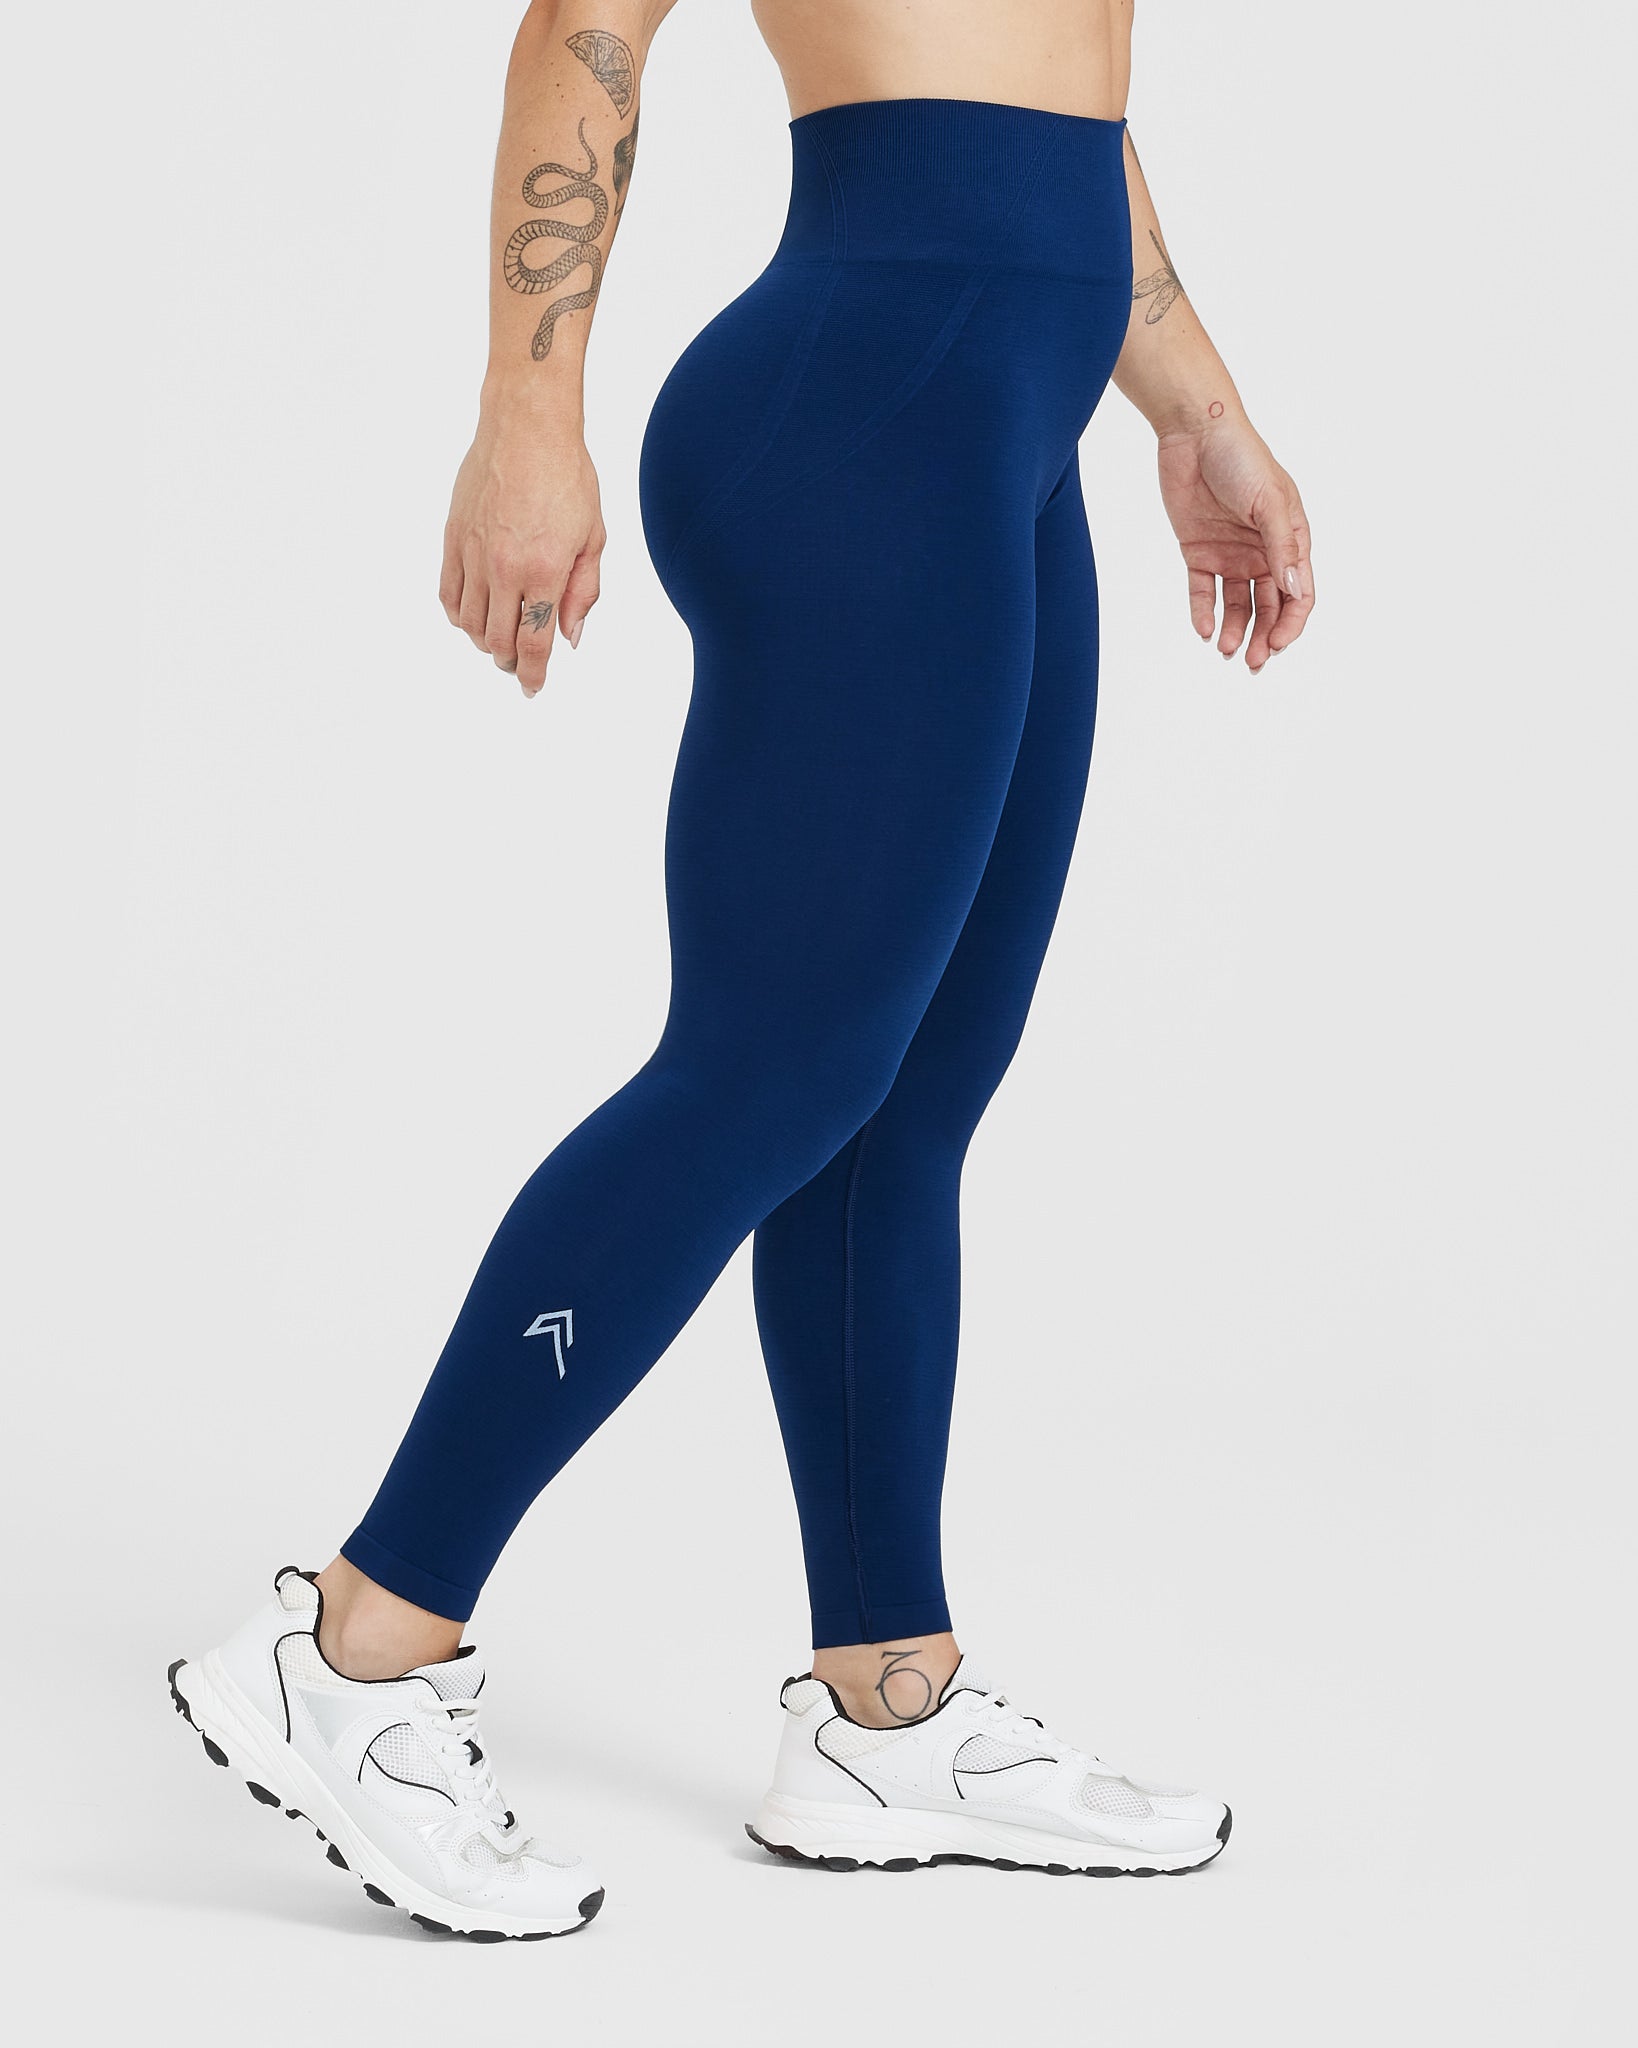 Seamless Seamless Workout Leggings For Leisure And Sports Tight And  Comfortable Style #230406 From Kong01, $12.56